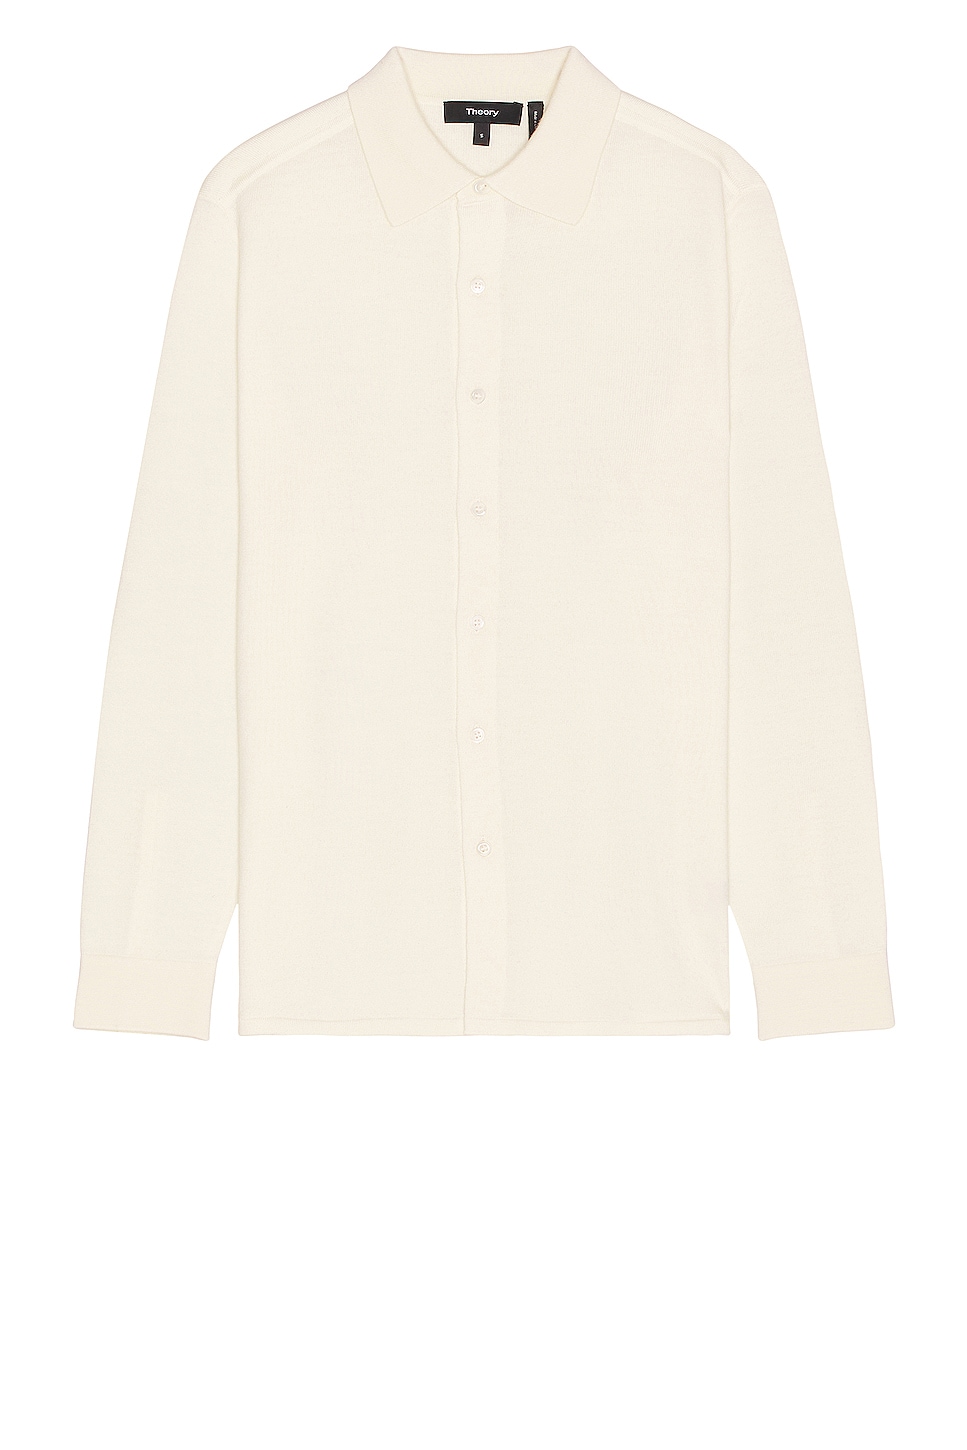 Image 1 of Theory Lorean Shirt in Ivory